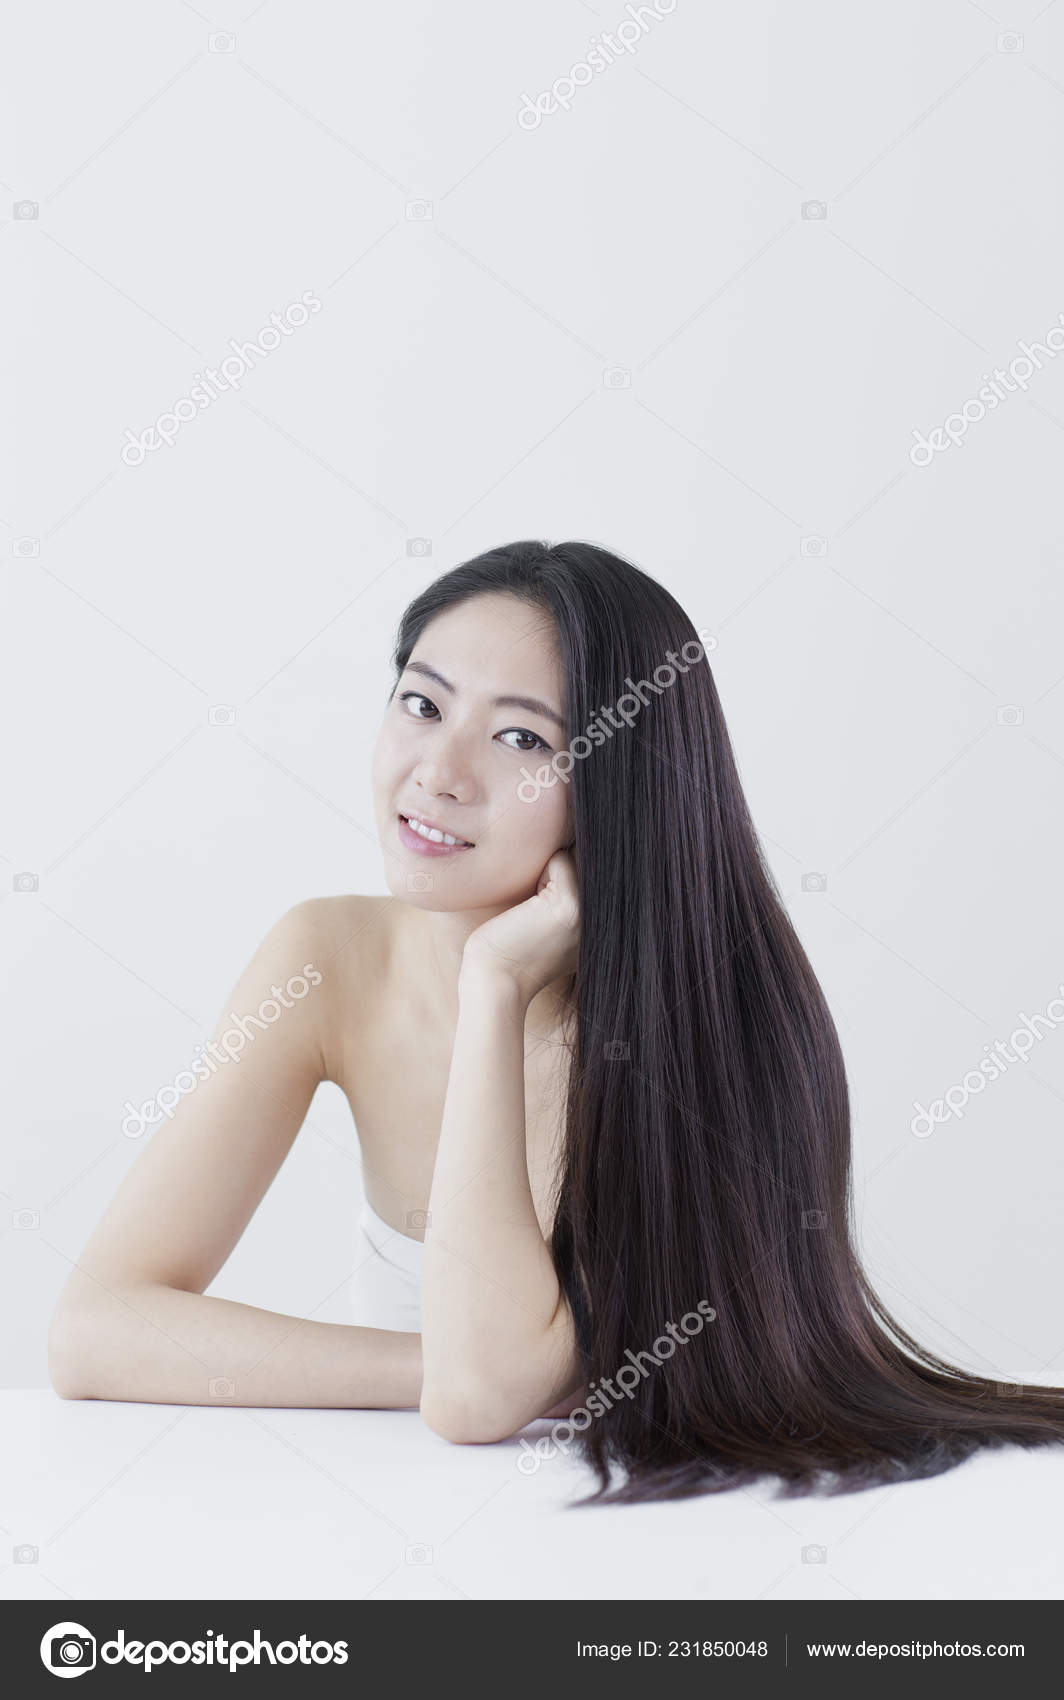 Young Asian Woman Black Long Hair Hands Her Chin Looking Stock Photo C Imagemore 231850048